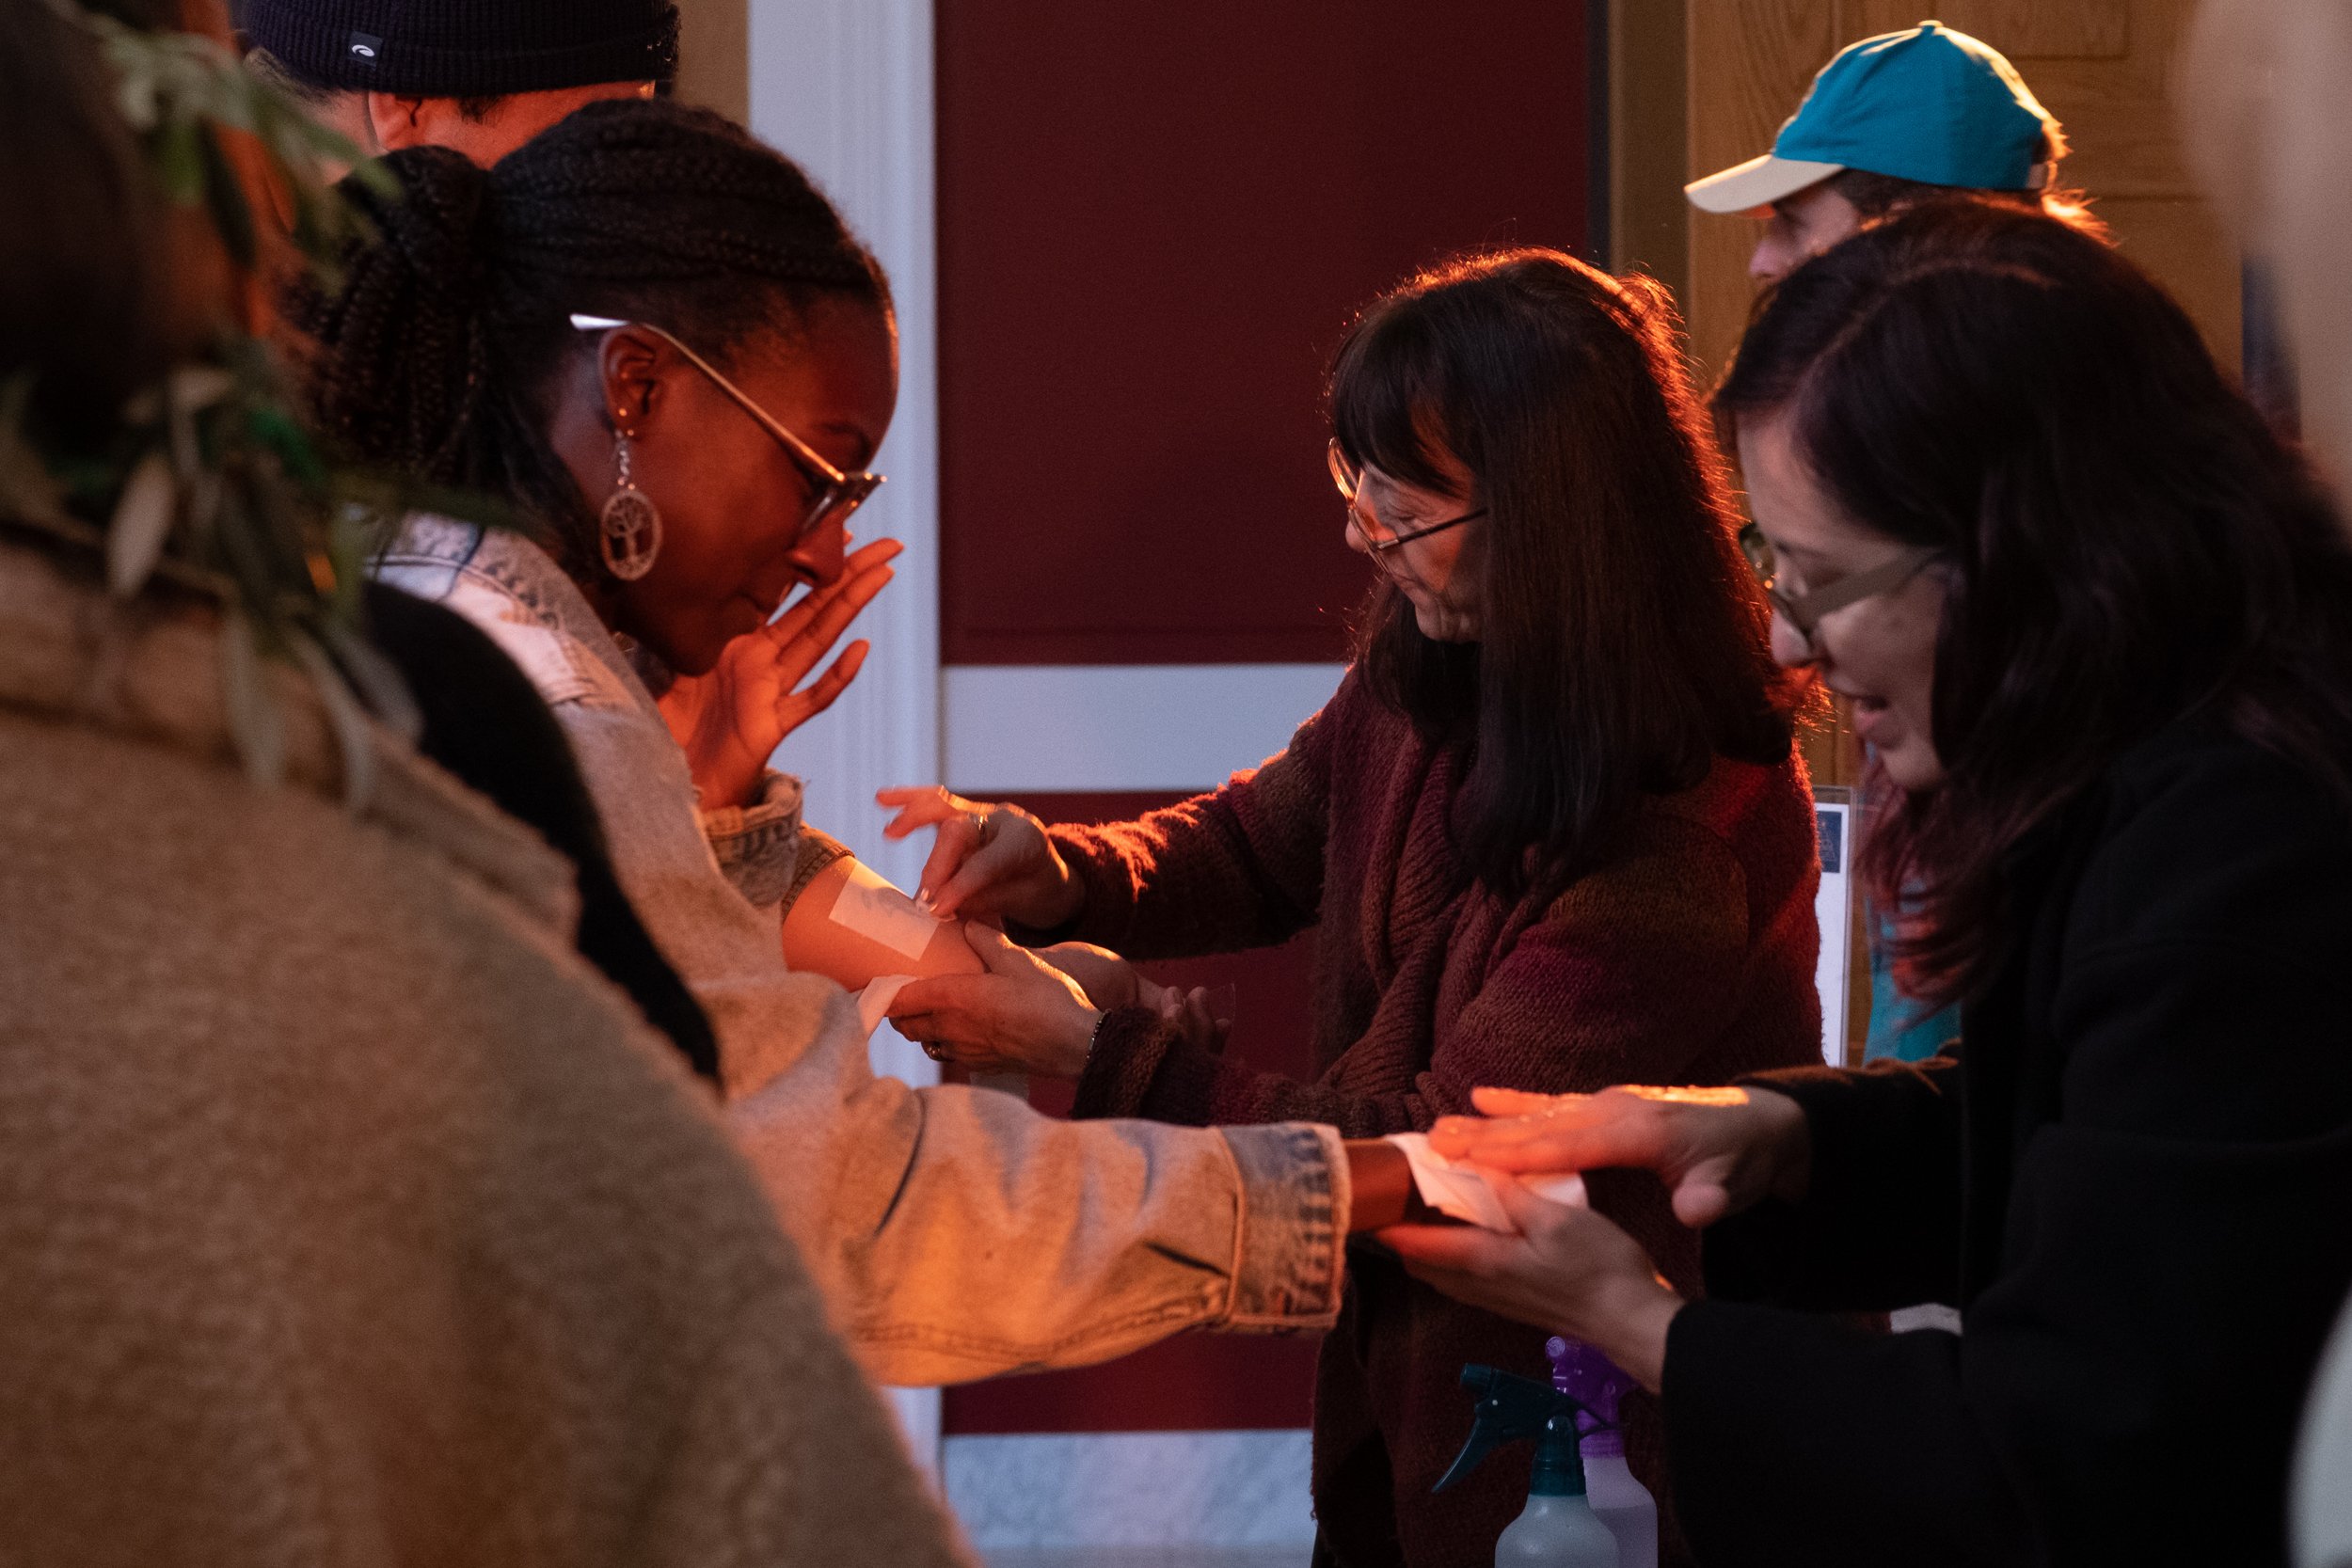  Staff at the Getty Villa Museum in Pacific Palisades, Calif. have prepared multiple activities for students to participate in at College Night on Wednesday, March 22, 2023. Students are getting temporary tattoos applied to their forearms. (Akemi Ric